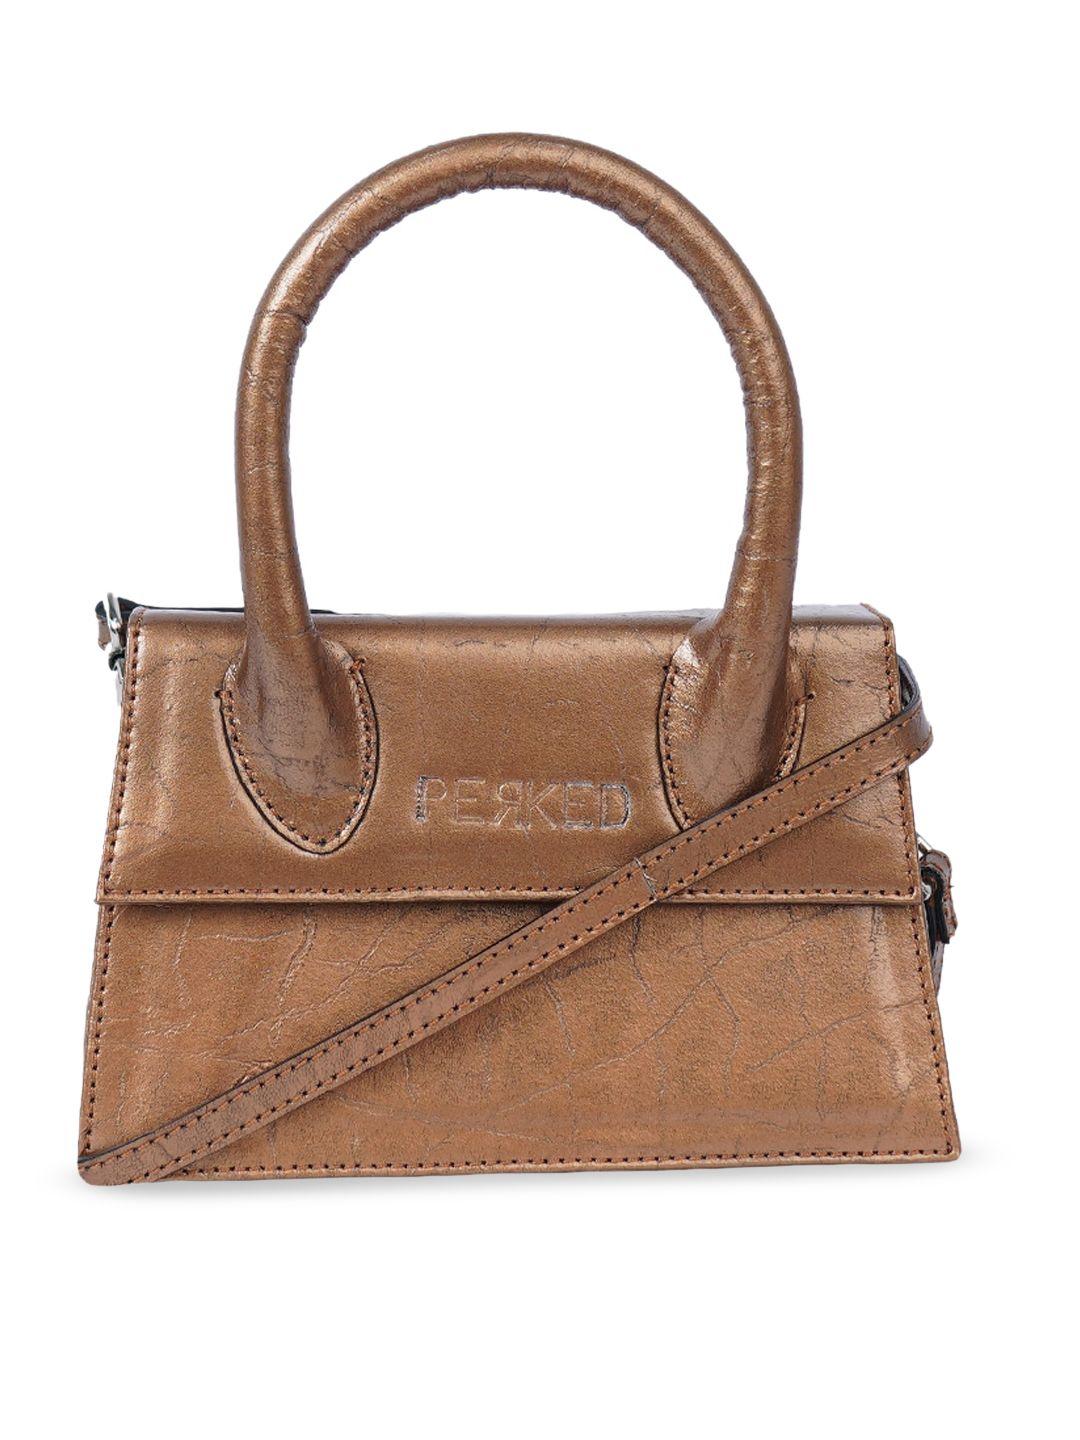 perked copper-toned textured leather structured satchel